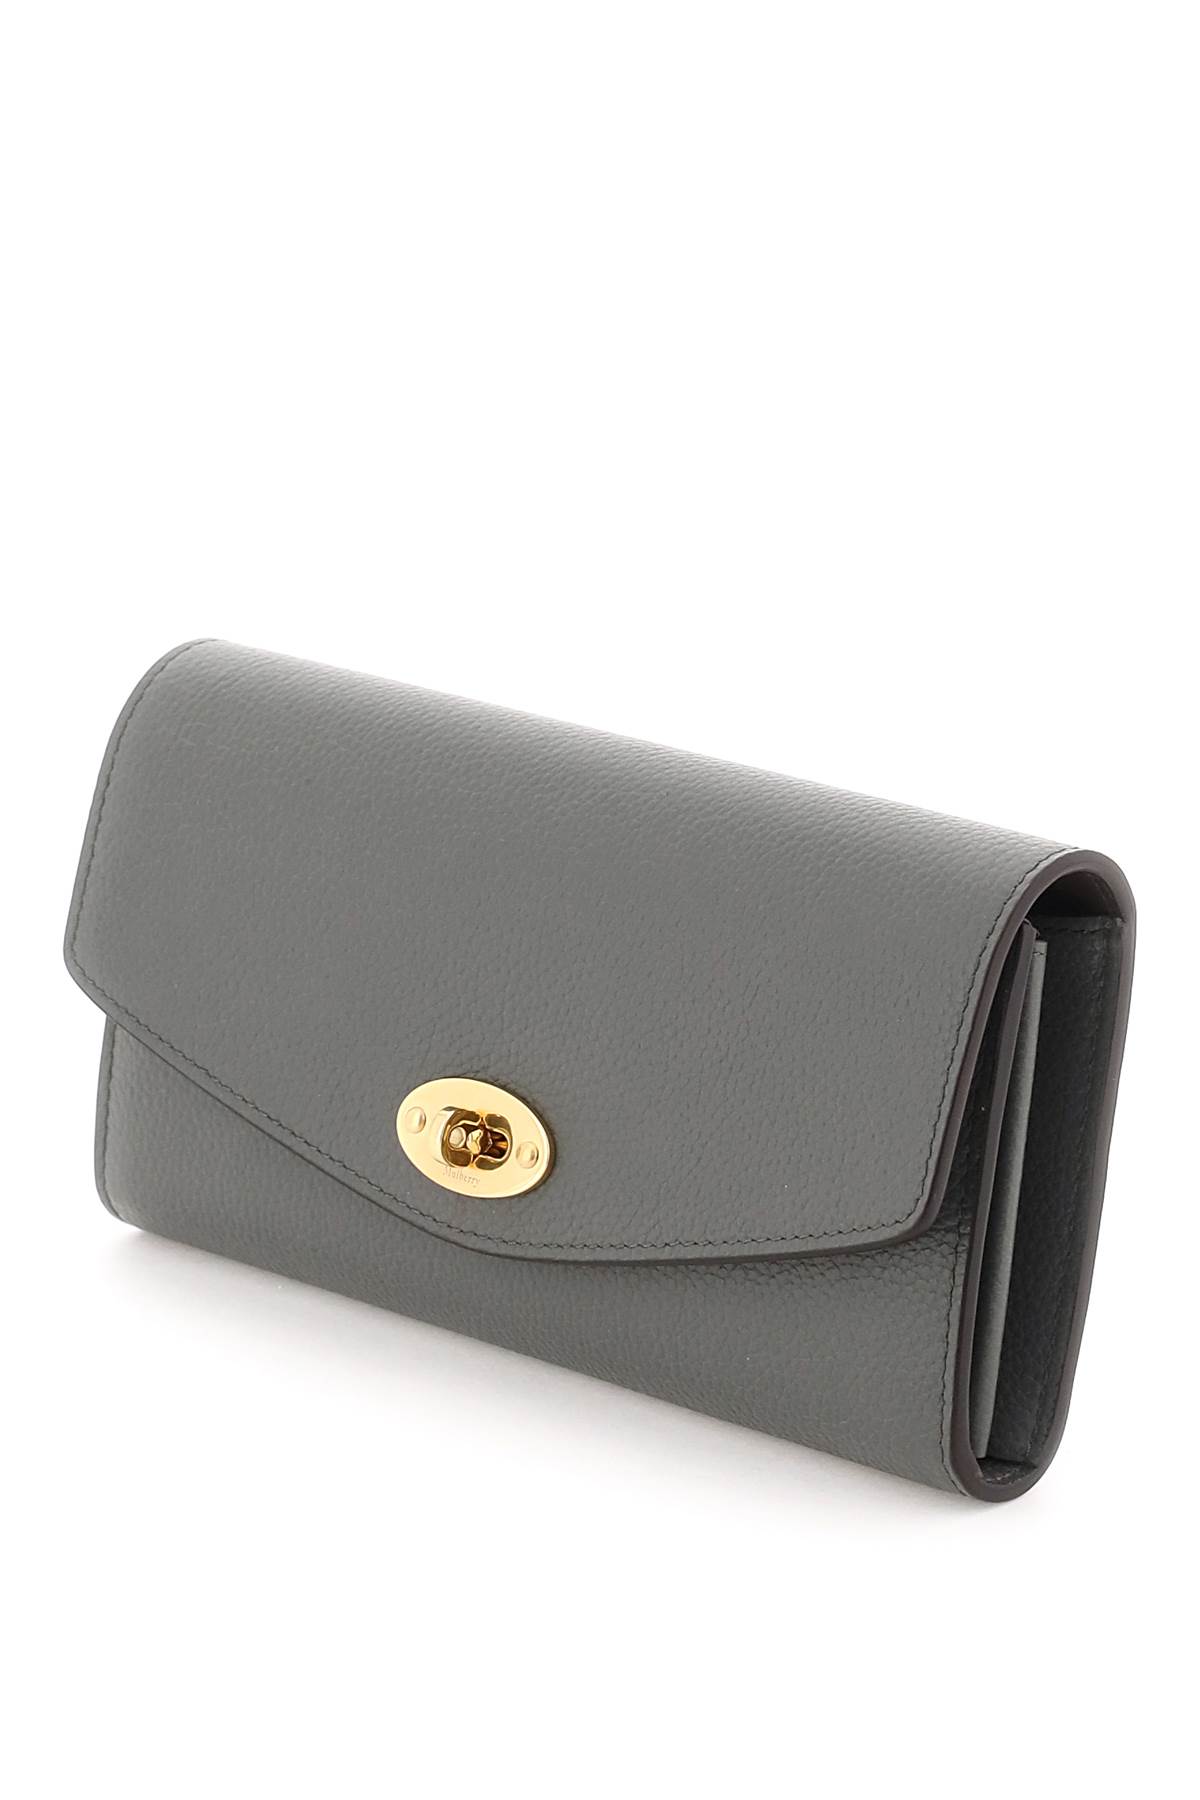 Shop Mulberry Darley Wallet In Charcoal (grey)